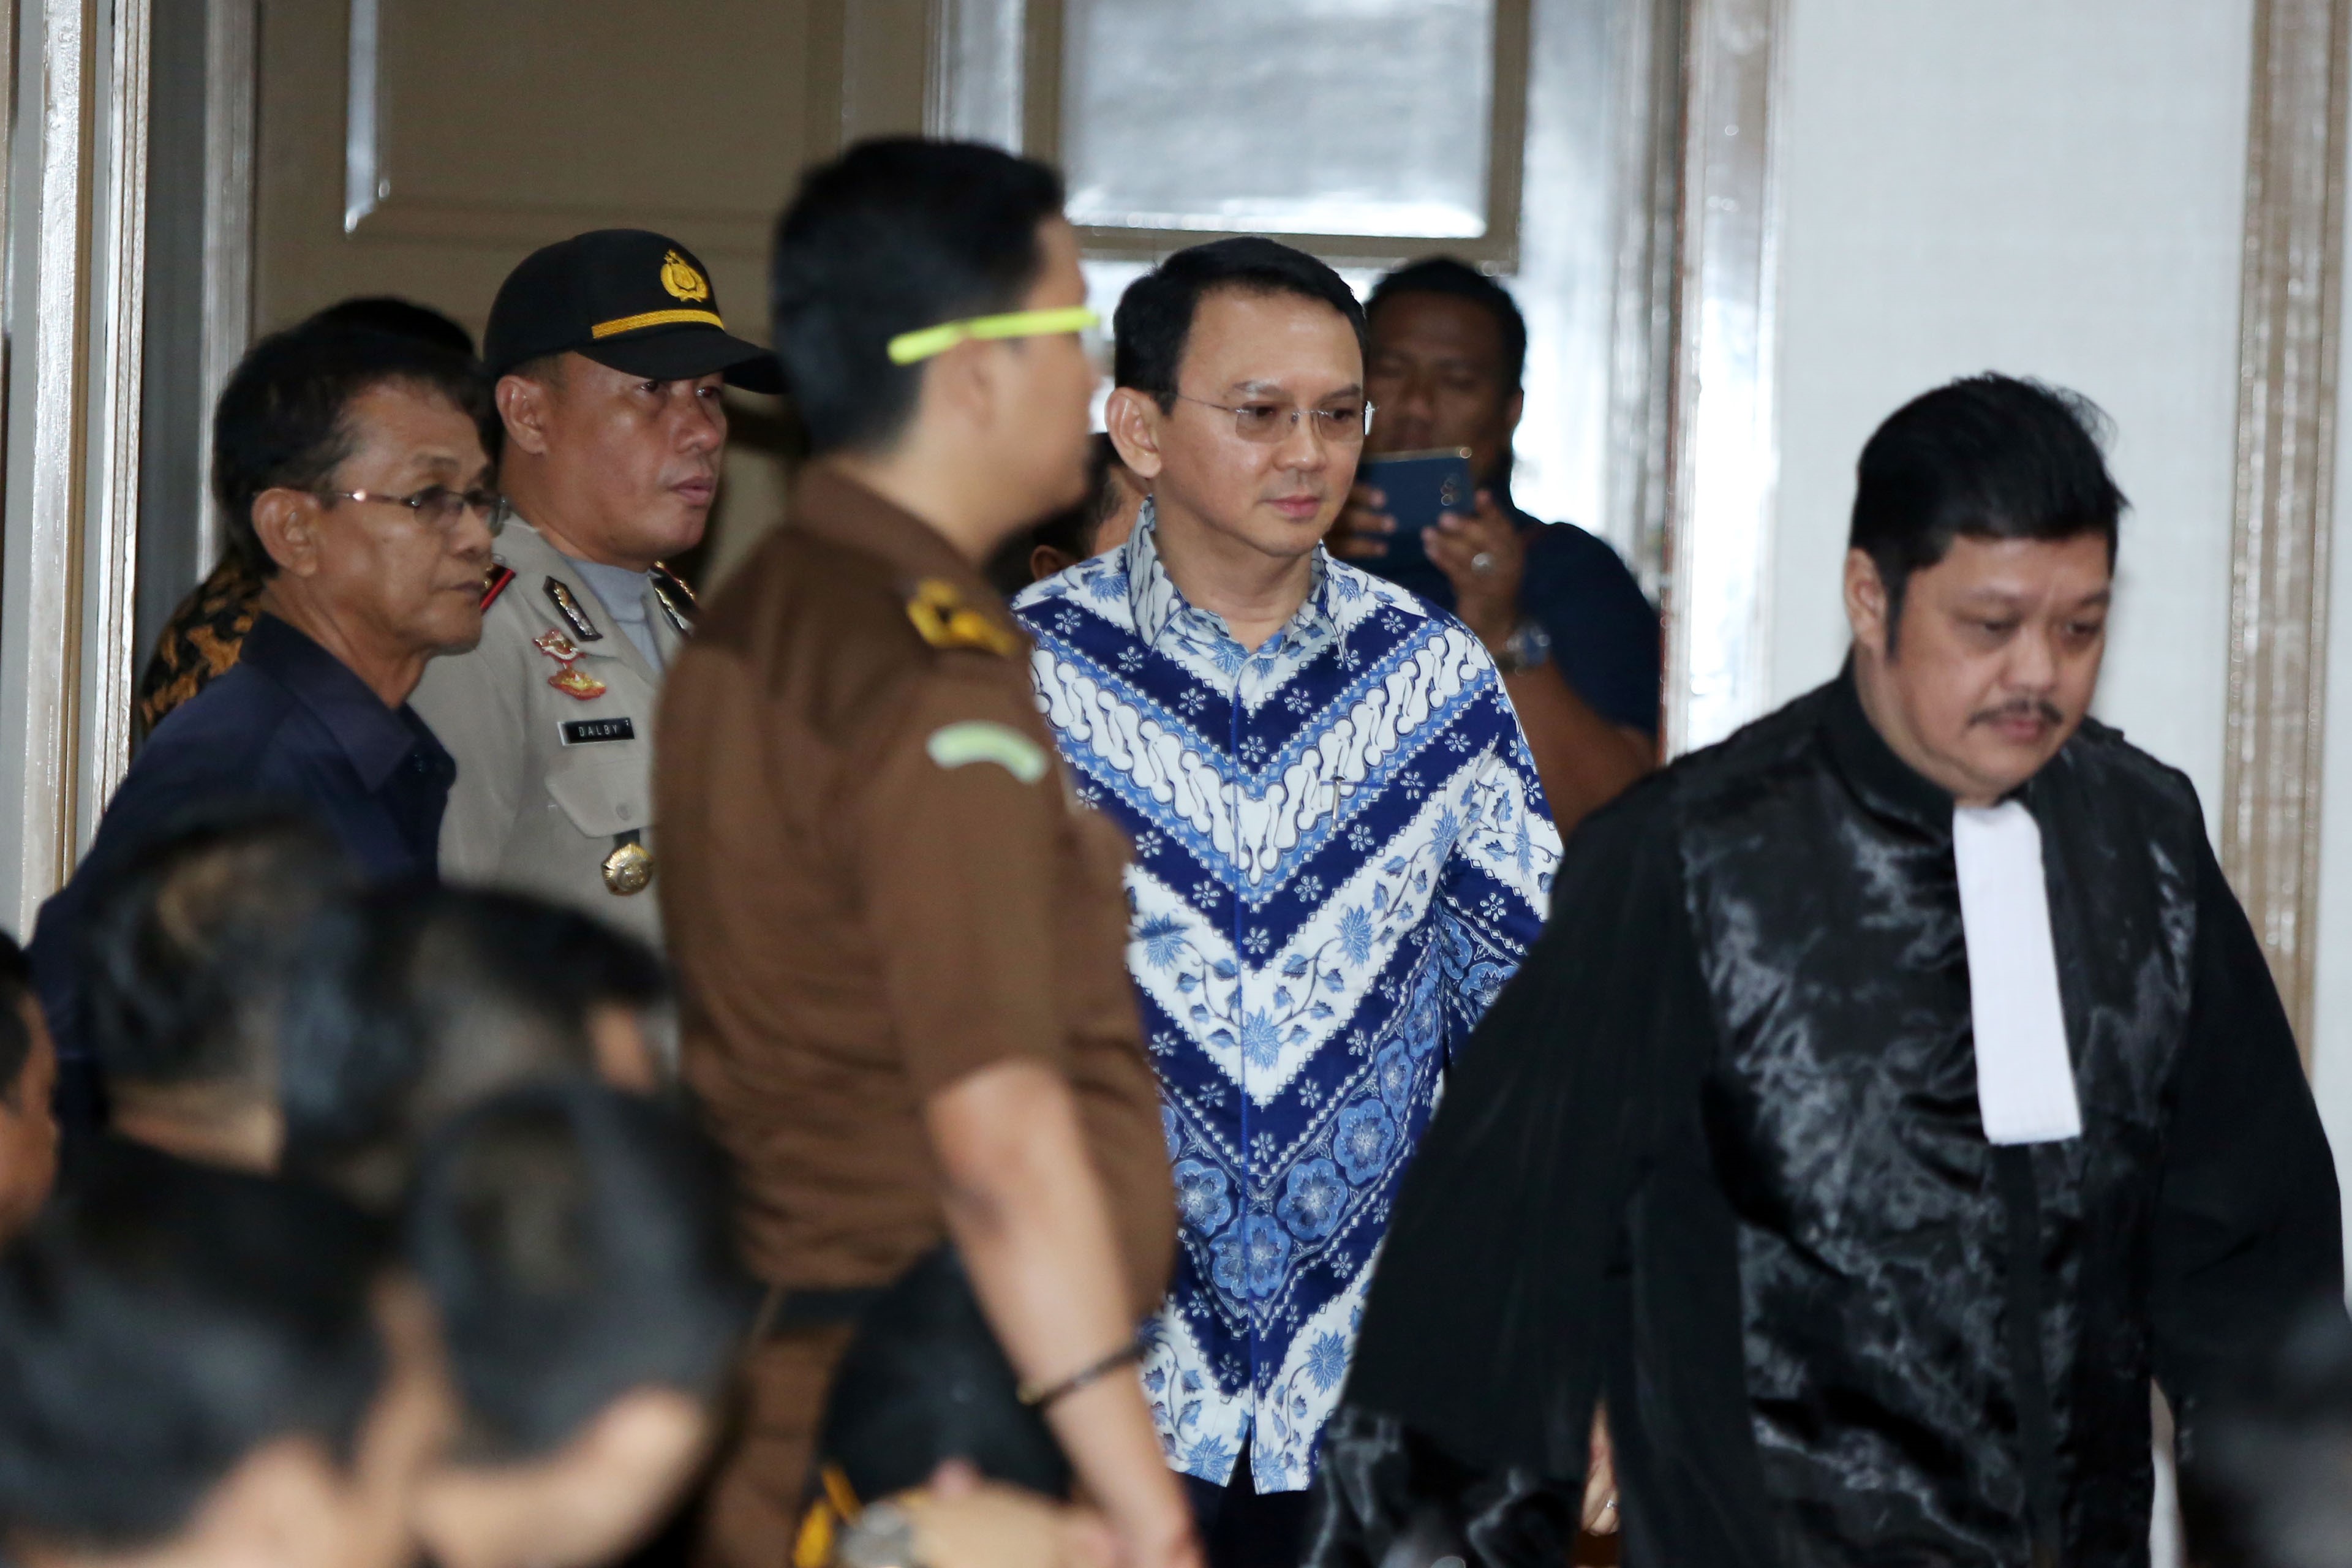 Jakarta's Christian governor Basuki Tjahaja Purnama, popularly known as Ahok, arrives at a courtroom for his verdict and sentence in his blasphemy trial in Jakarta on May 9, 2017. (Isra Triansyah/ Sindonews.com/ Pool/Anadolu Agency—Getty Images))